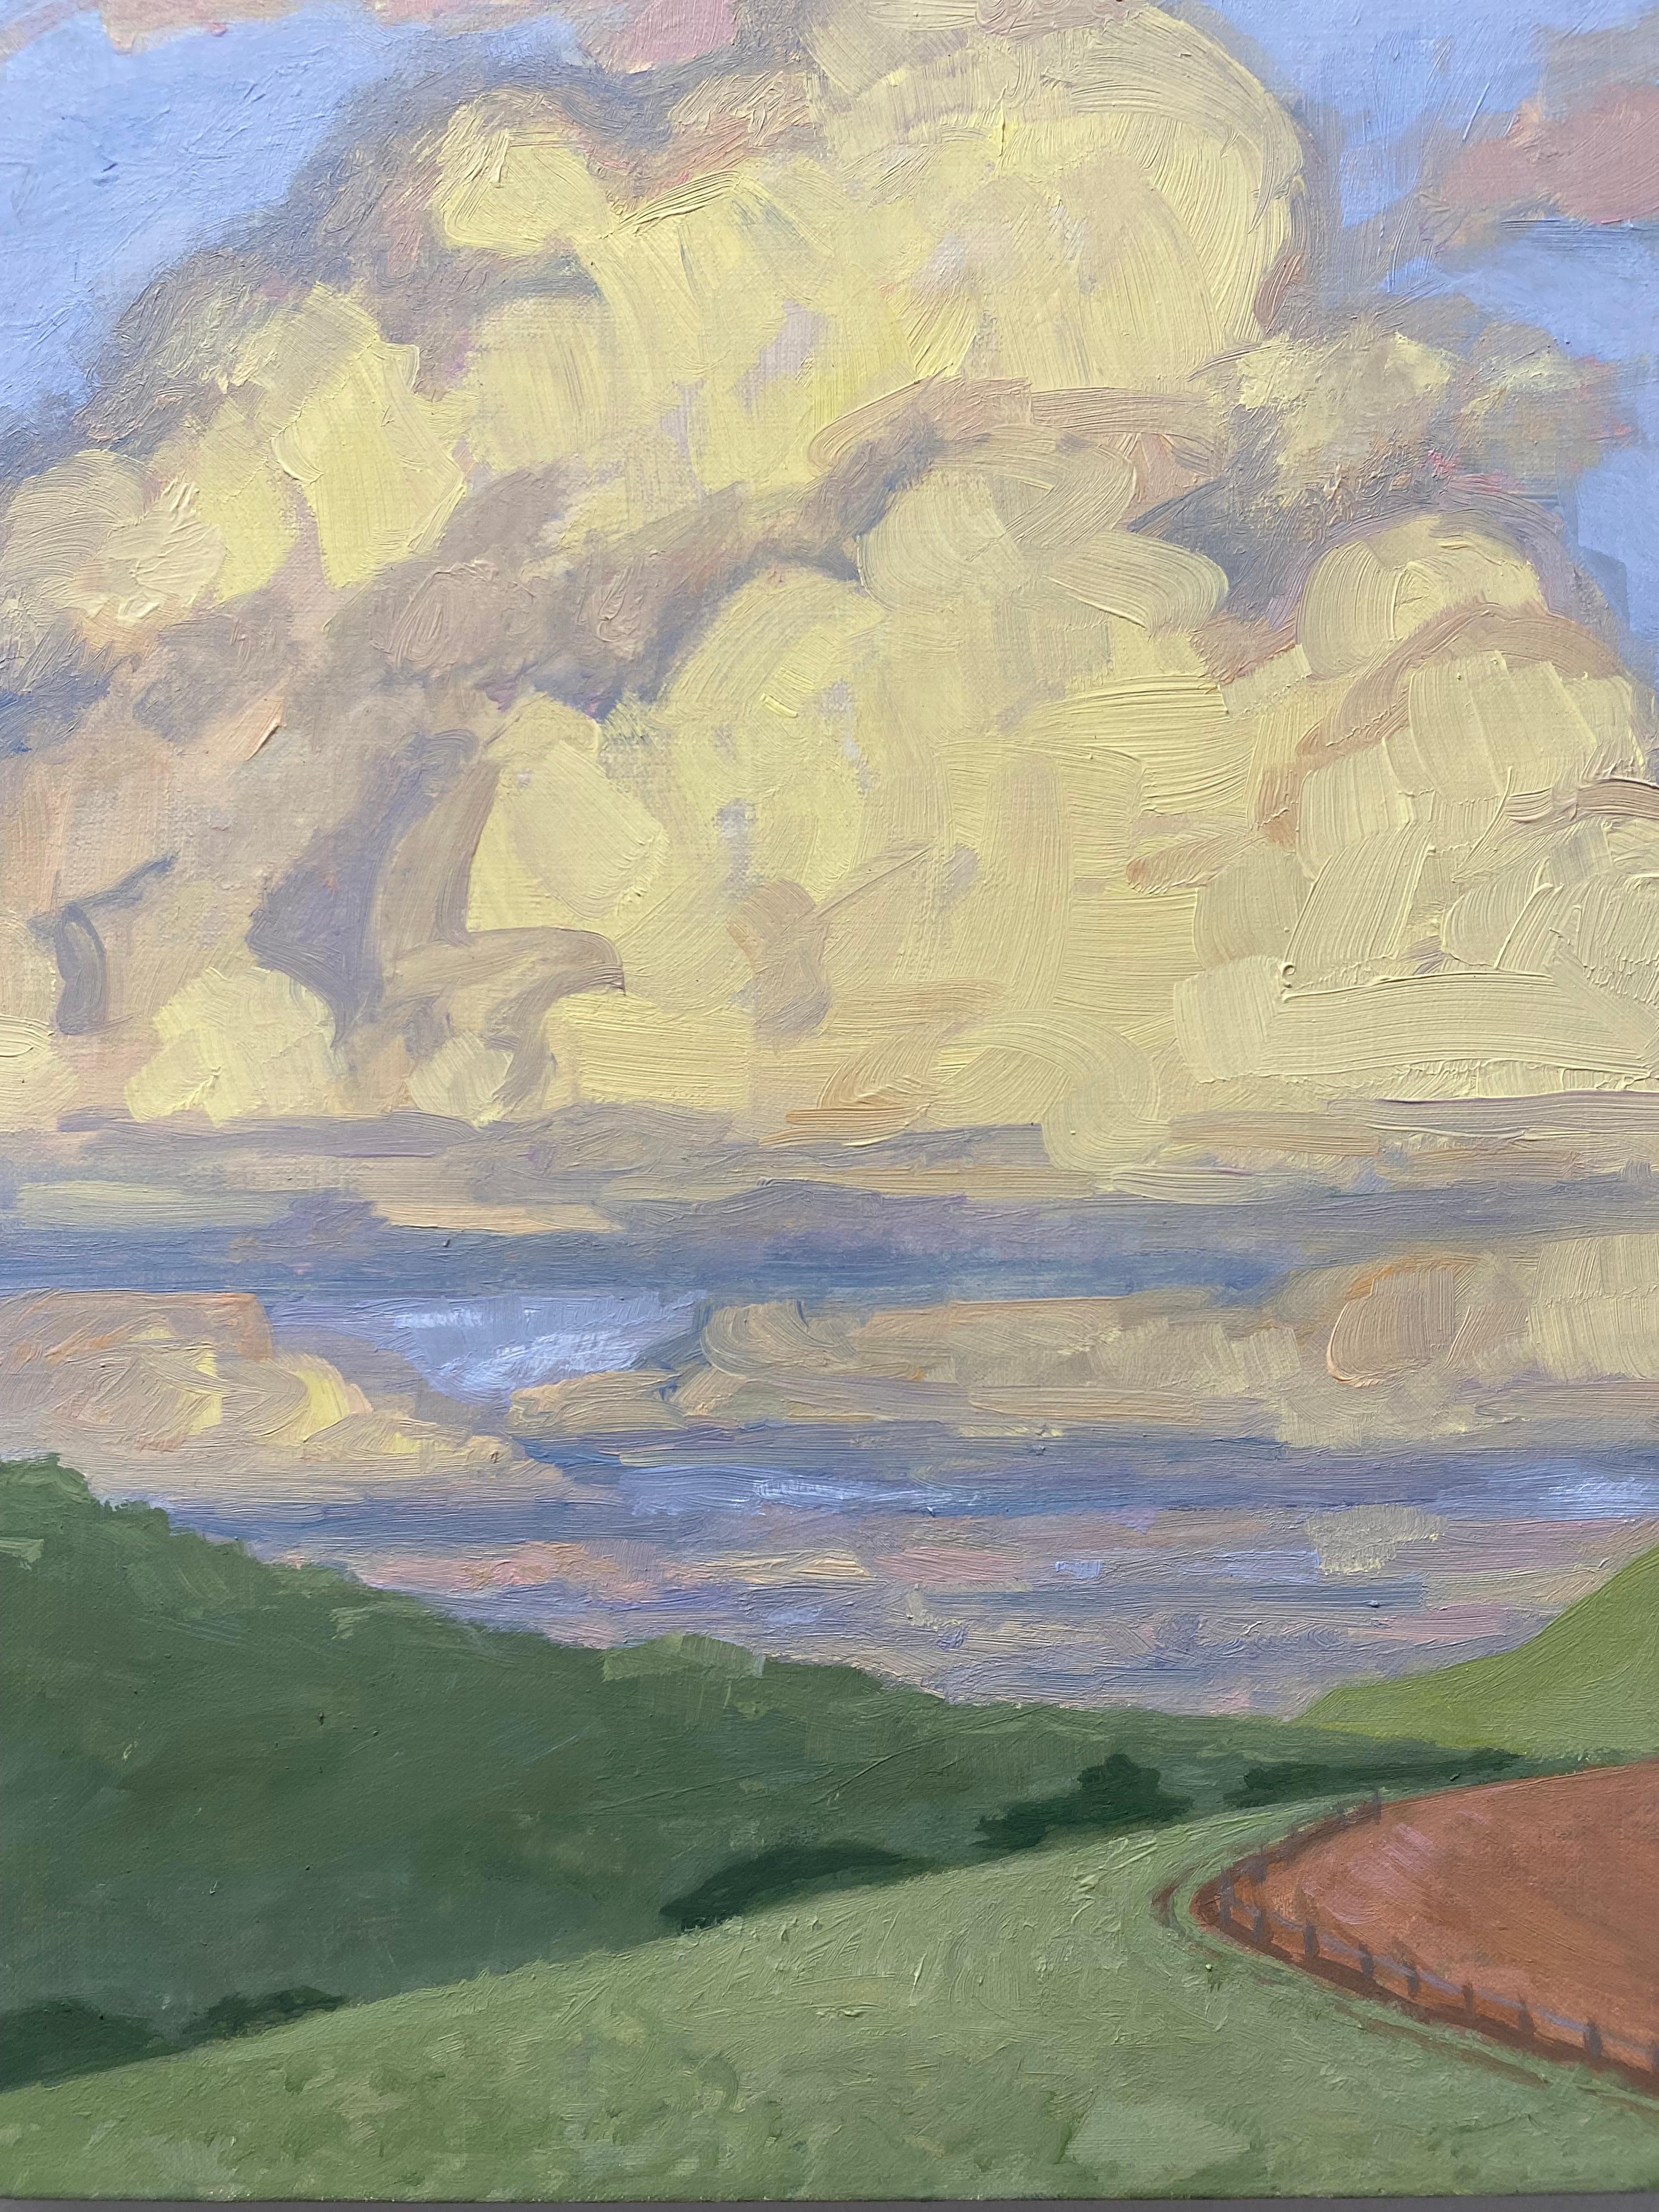 Ivory clouds float in periwinkle blue skies over an idyllic rural landscape with green rolling hills and a field with a red roofed house in the distance. Signed, dated and titled on verso.

KK Kozik is a landscape painter, a figurative painter, and